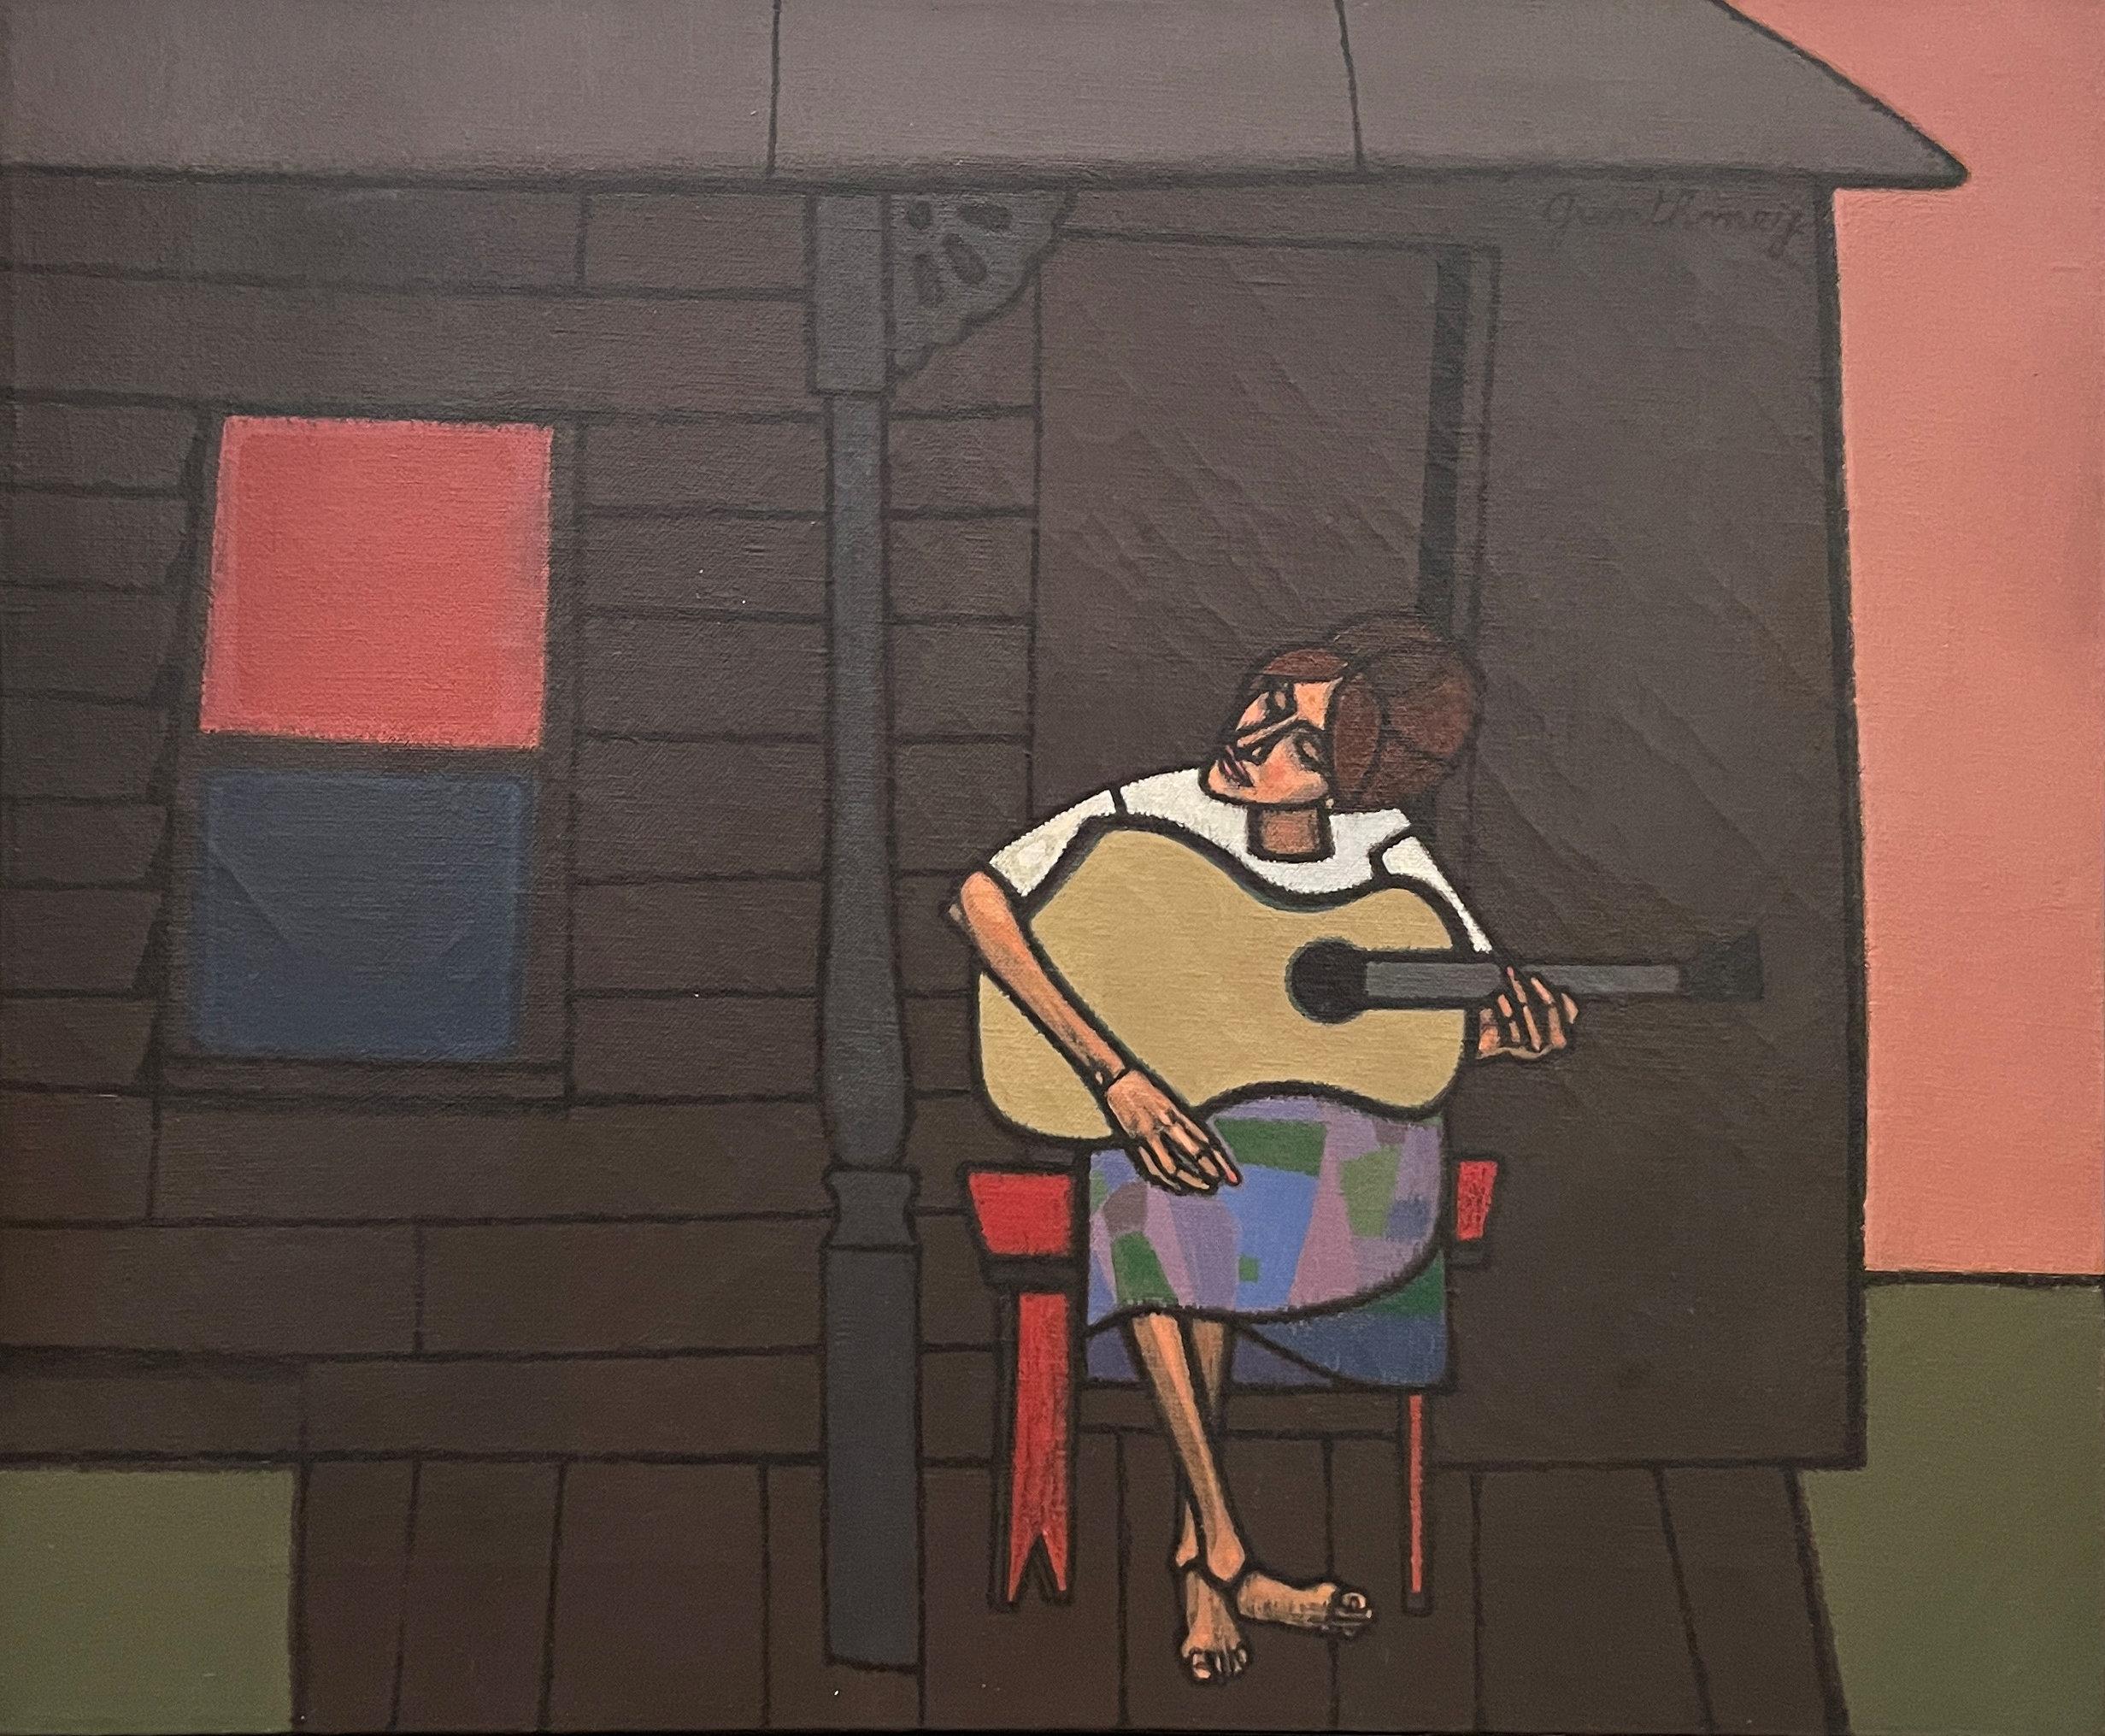 Robert Gwathmey
Girl with Guitar, 1965
Signed upper right
Oil on canvas
16 x 20 inches

Provenance:
The artist
ACA Galleries, New York
Mr. Moses Asch, New York
Terry Dintenfass Gallery, New York
Christie's East, November 14, 1991, Lot 440
Private